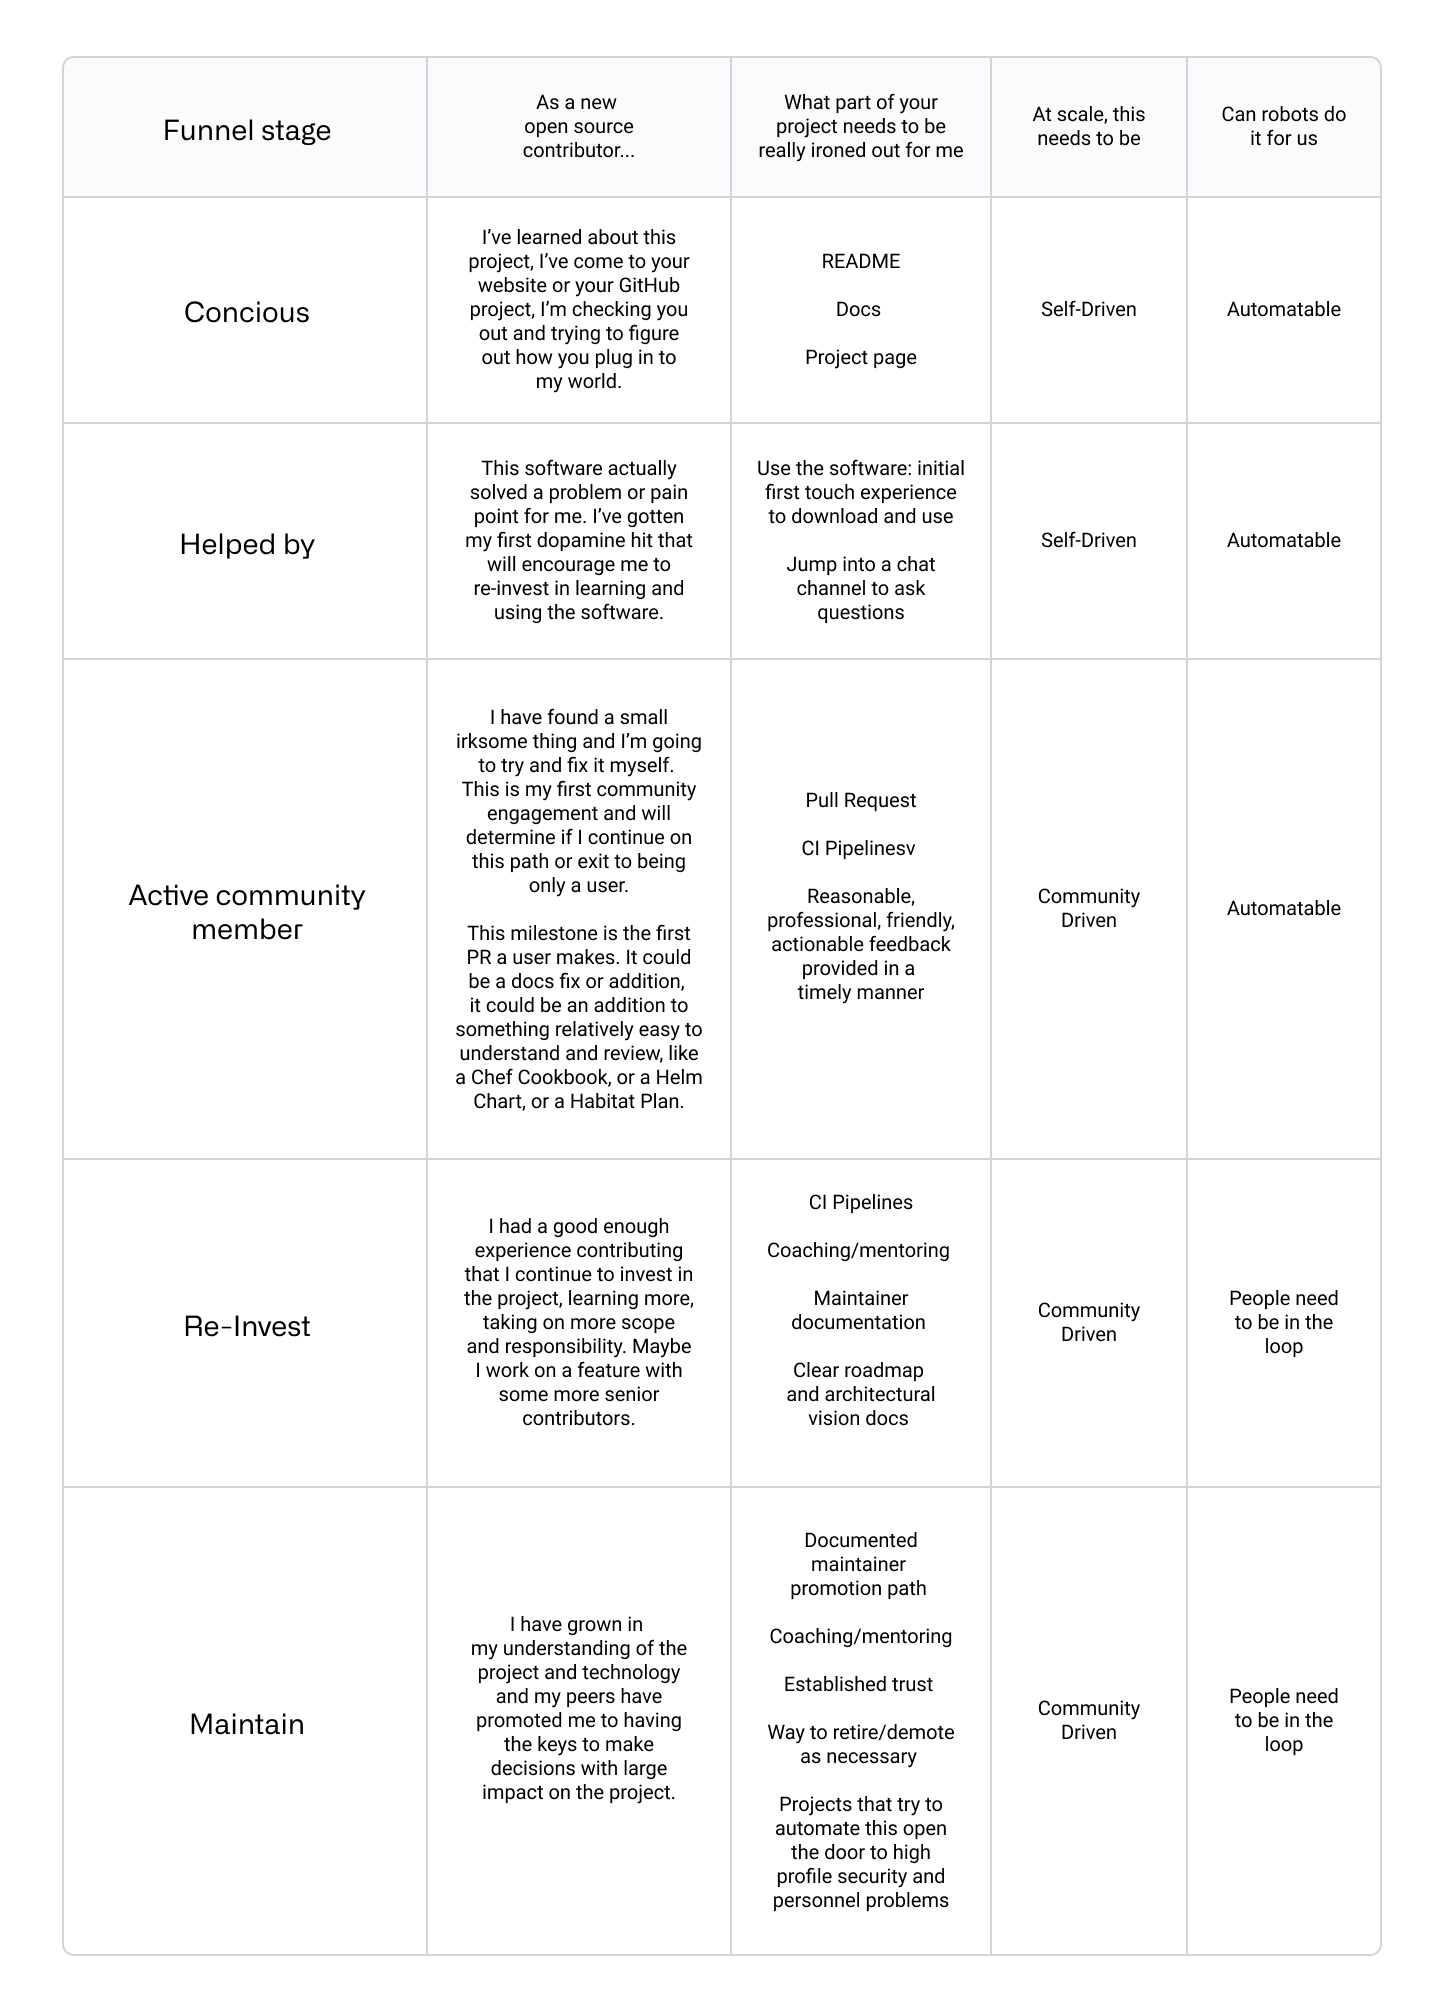 A table that shows each funnel stage of engagement for users of an open source project, including: what new contributors can do, what part of project needs to be ironed out, if it can be self- or community-driven, and if robots can help automate